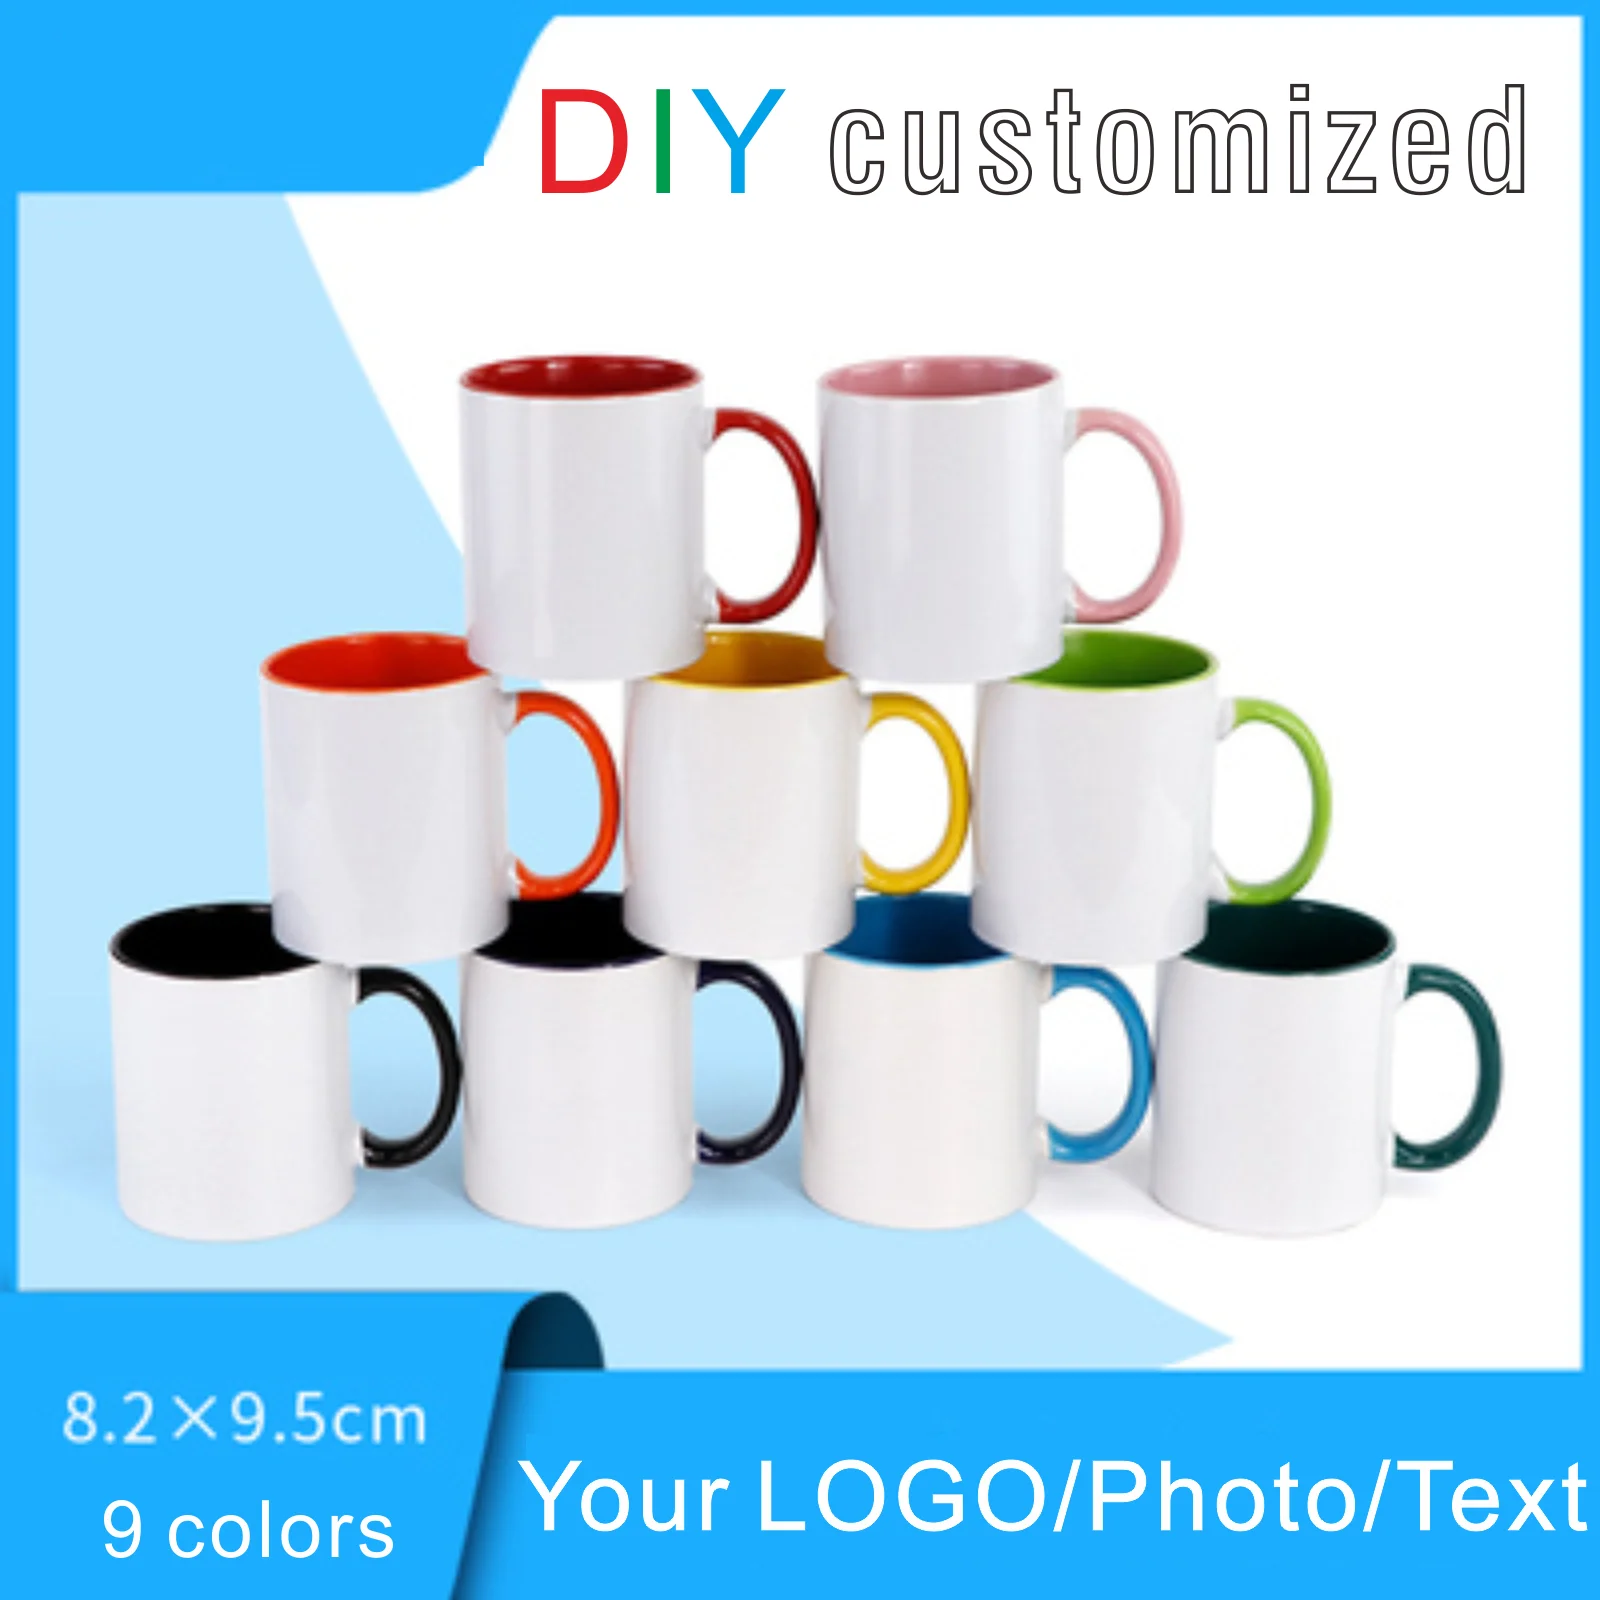 DIY Customized 350ML 12oz Ceramic Mug Print Picture Photo LOGO Text Personalized Coffee Milk Cup Creative Present Cute Gift images - 6